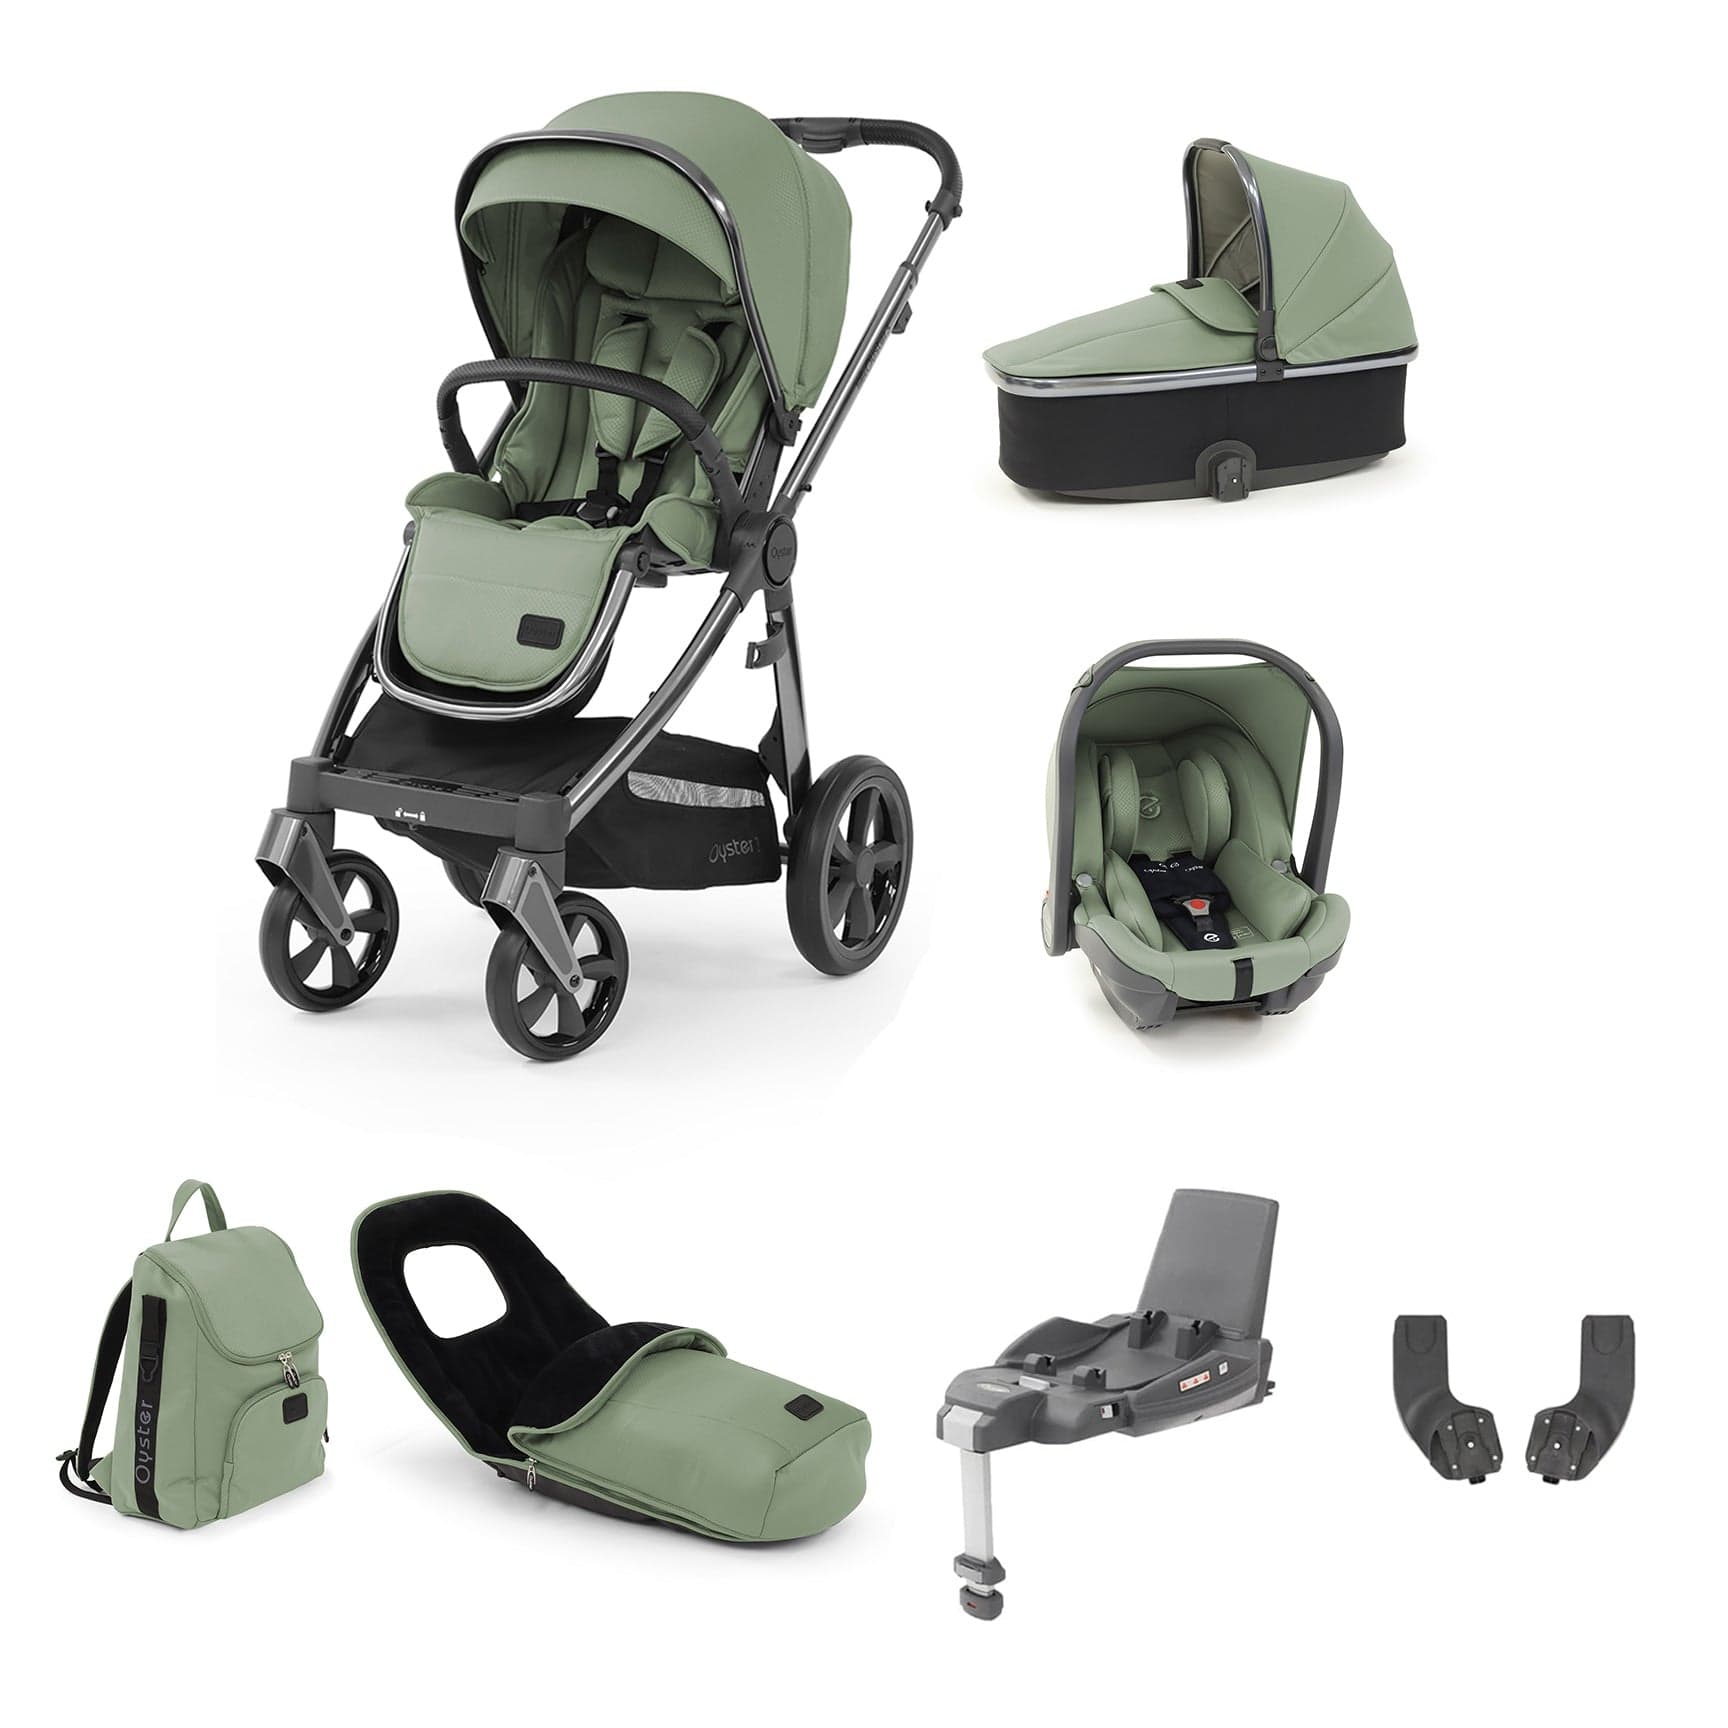 Babystyle Oyster 3 Luxury 7 Piece with Car Seat Bundle in Spearmint Travel Systems 5060711564425